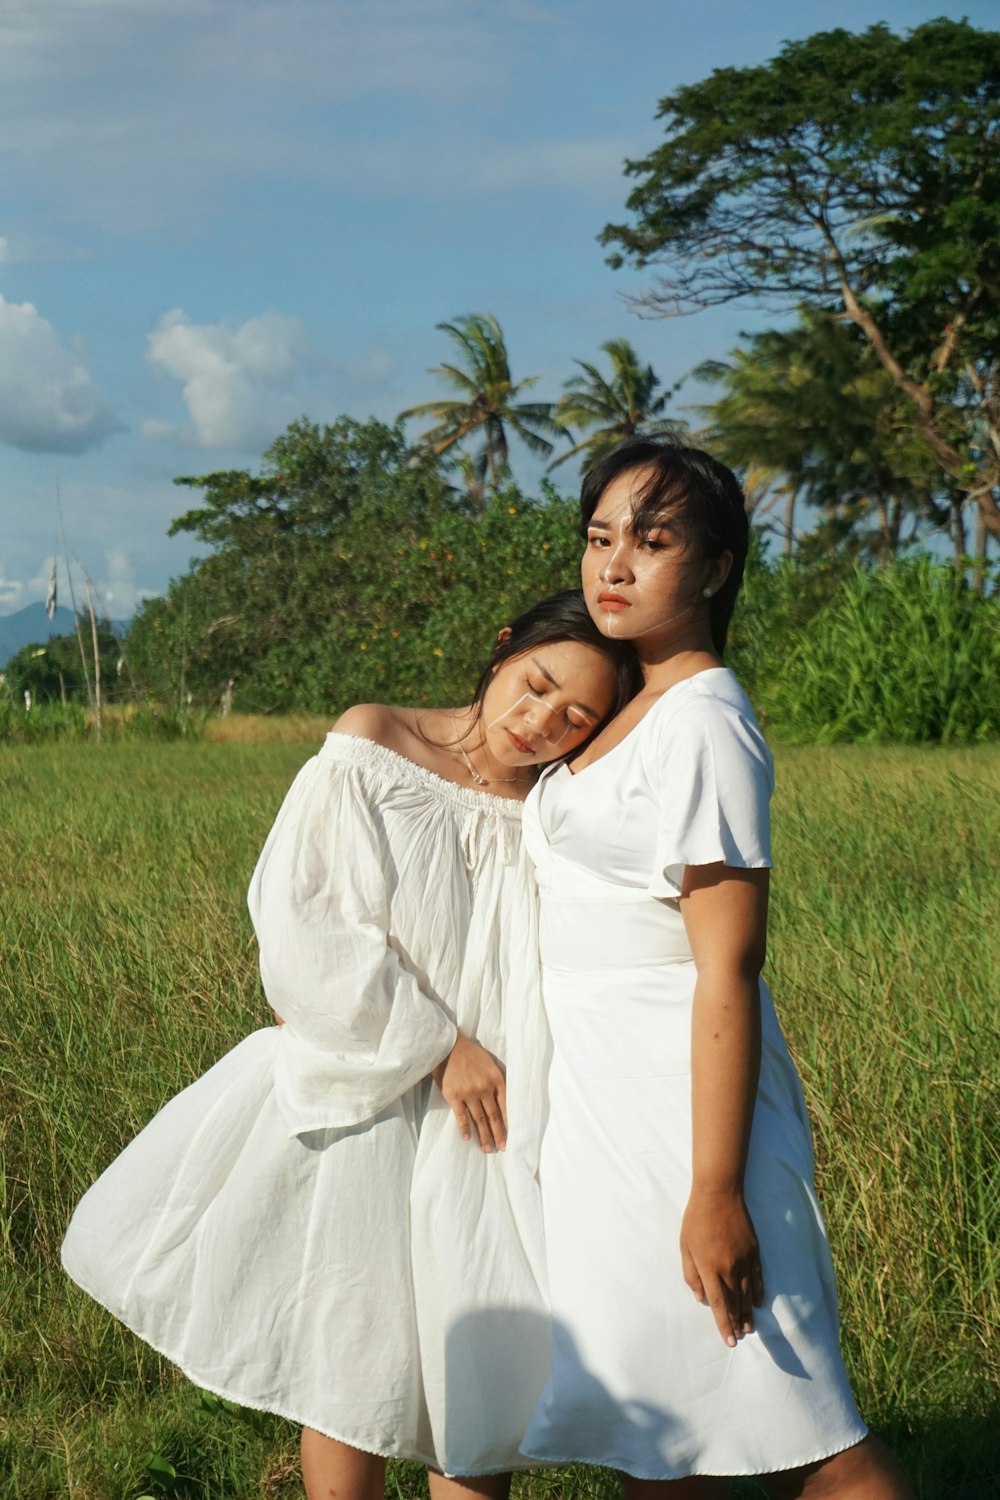 a person in a white dress and a person in a white dress